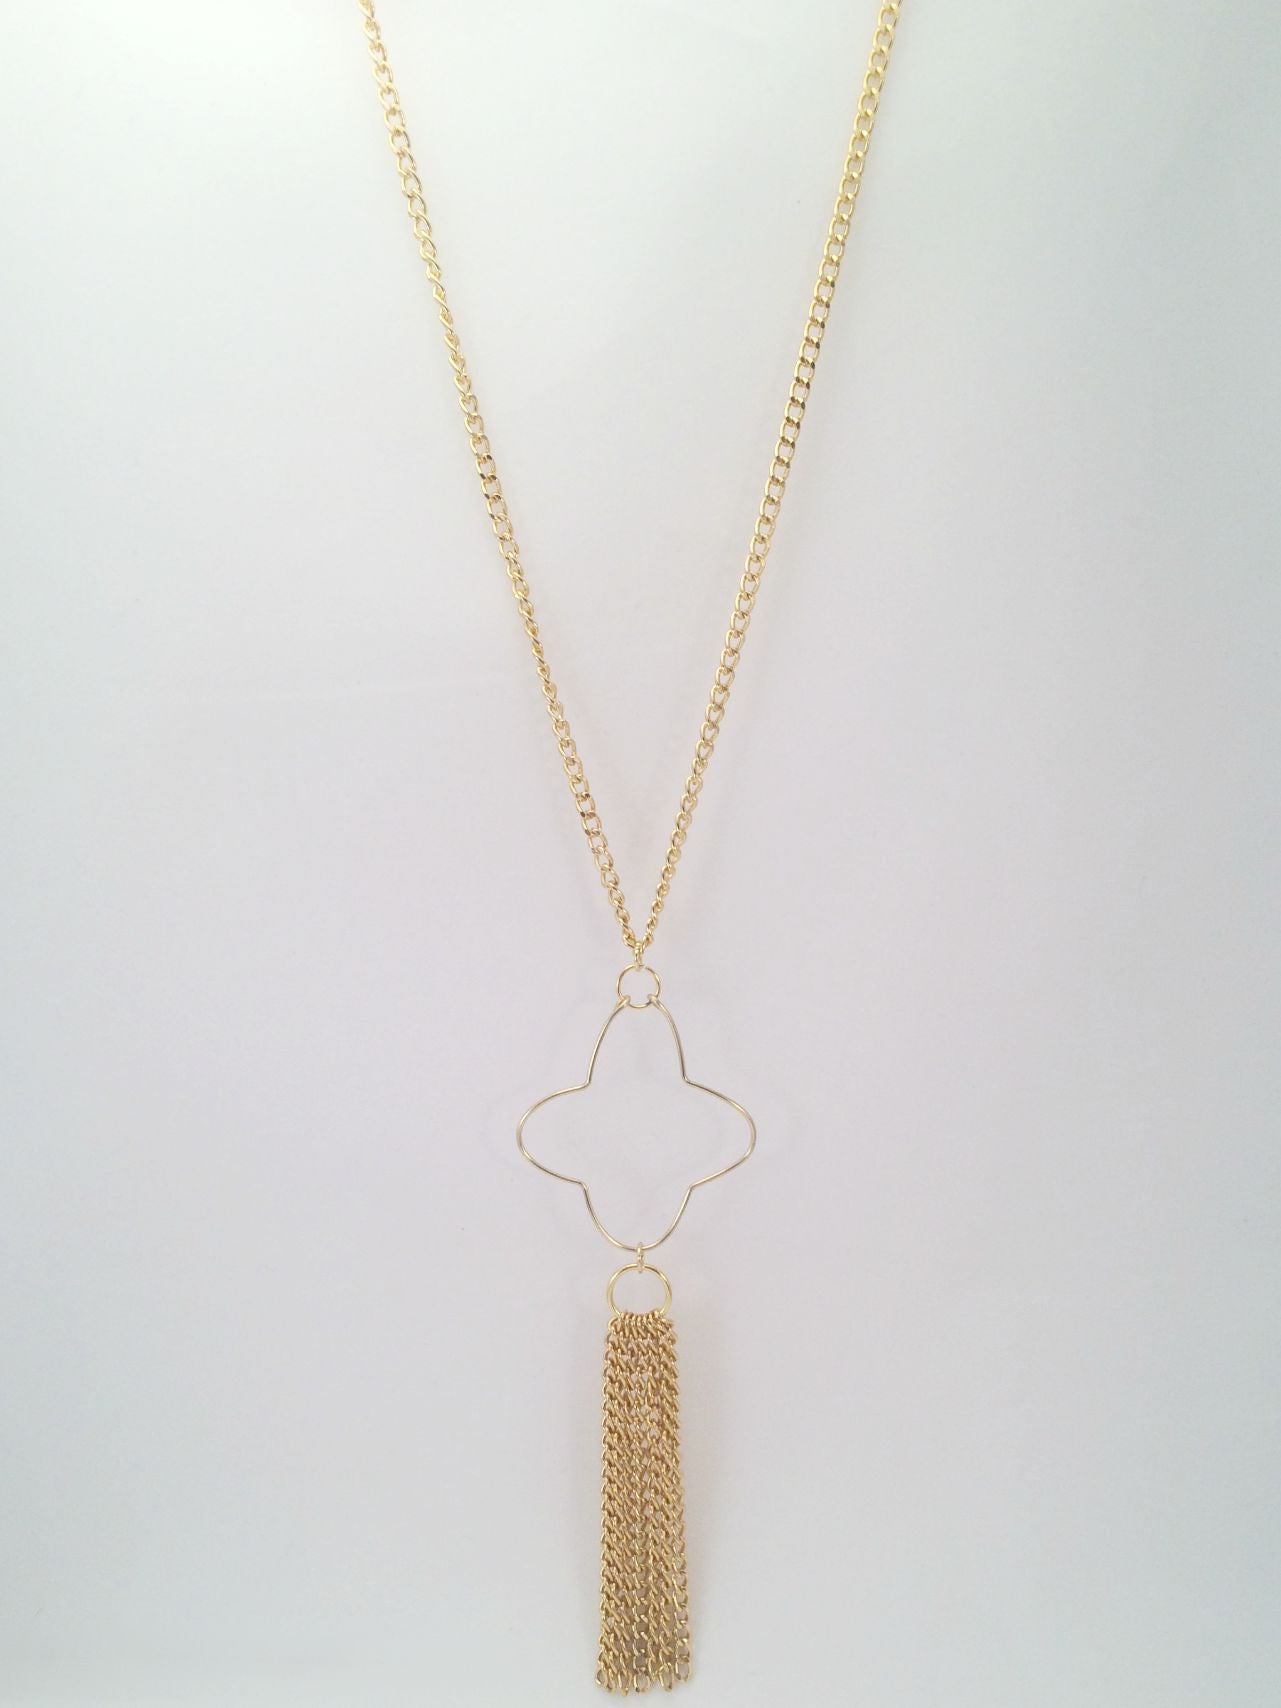 clover and tassel necklace